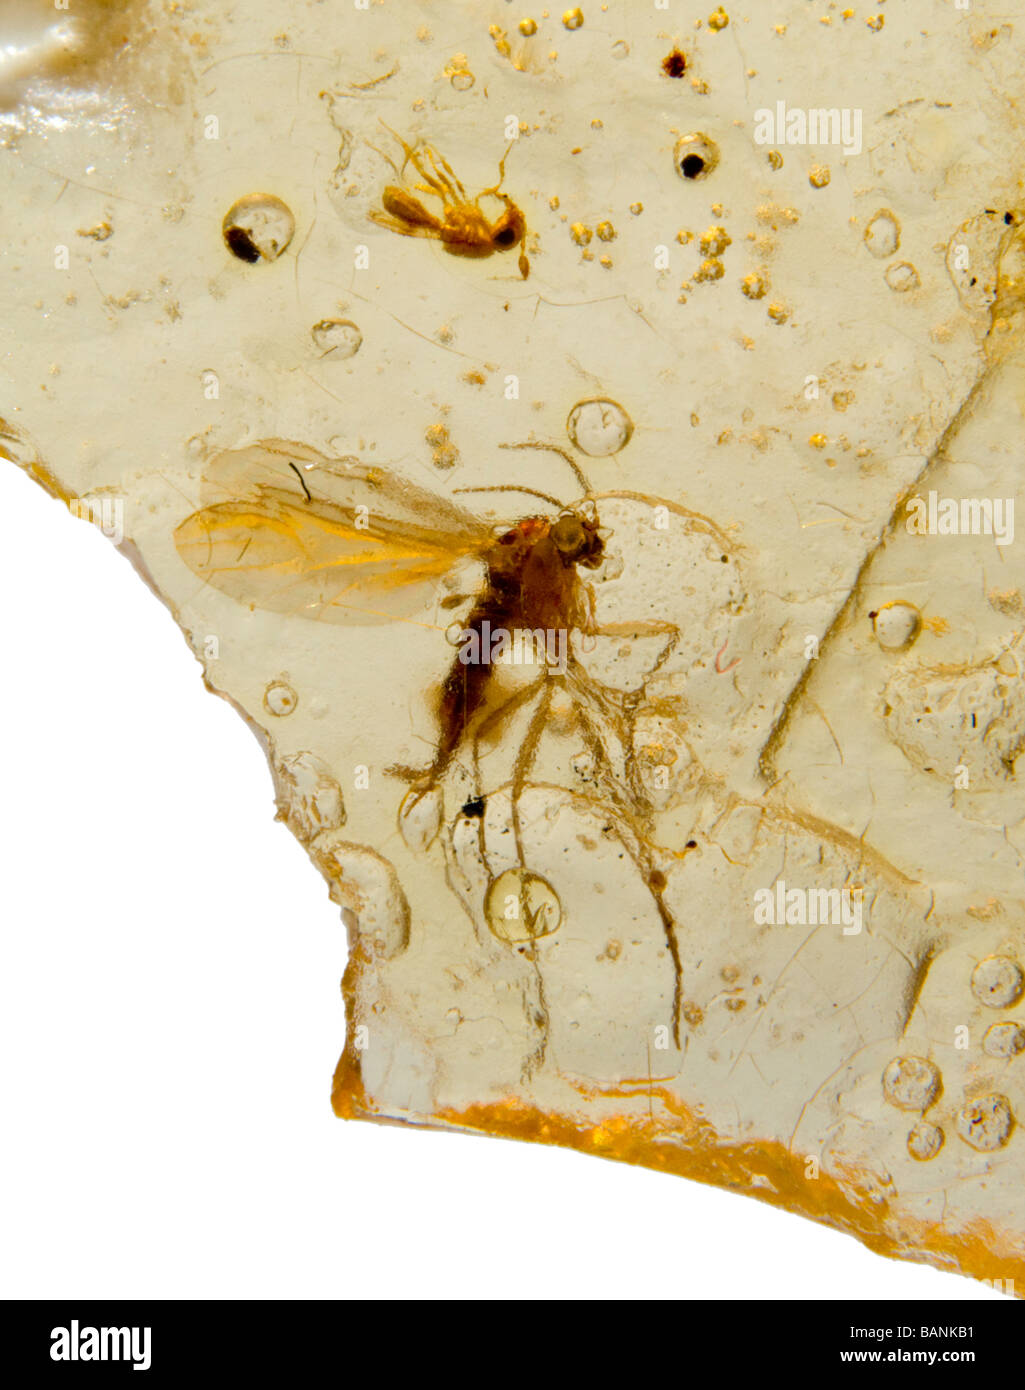 Insects trapped in Madagascar Copal (young amber - 10,000 to 100,000 years old) Stock Photo